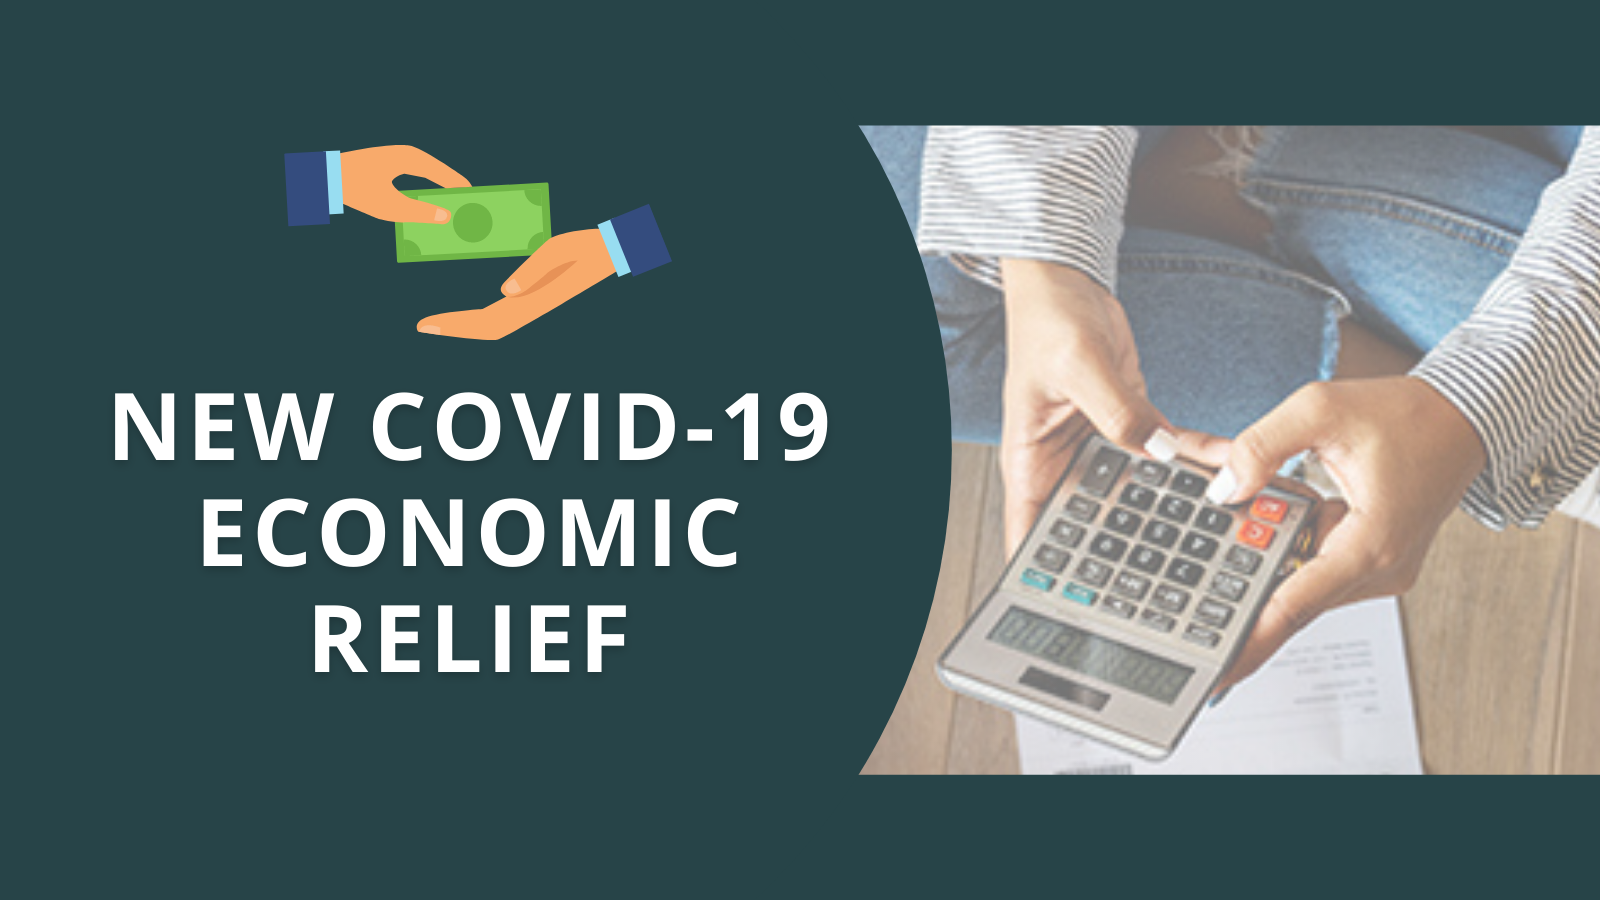 New COVID19 Economic Relief What You Need to Know